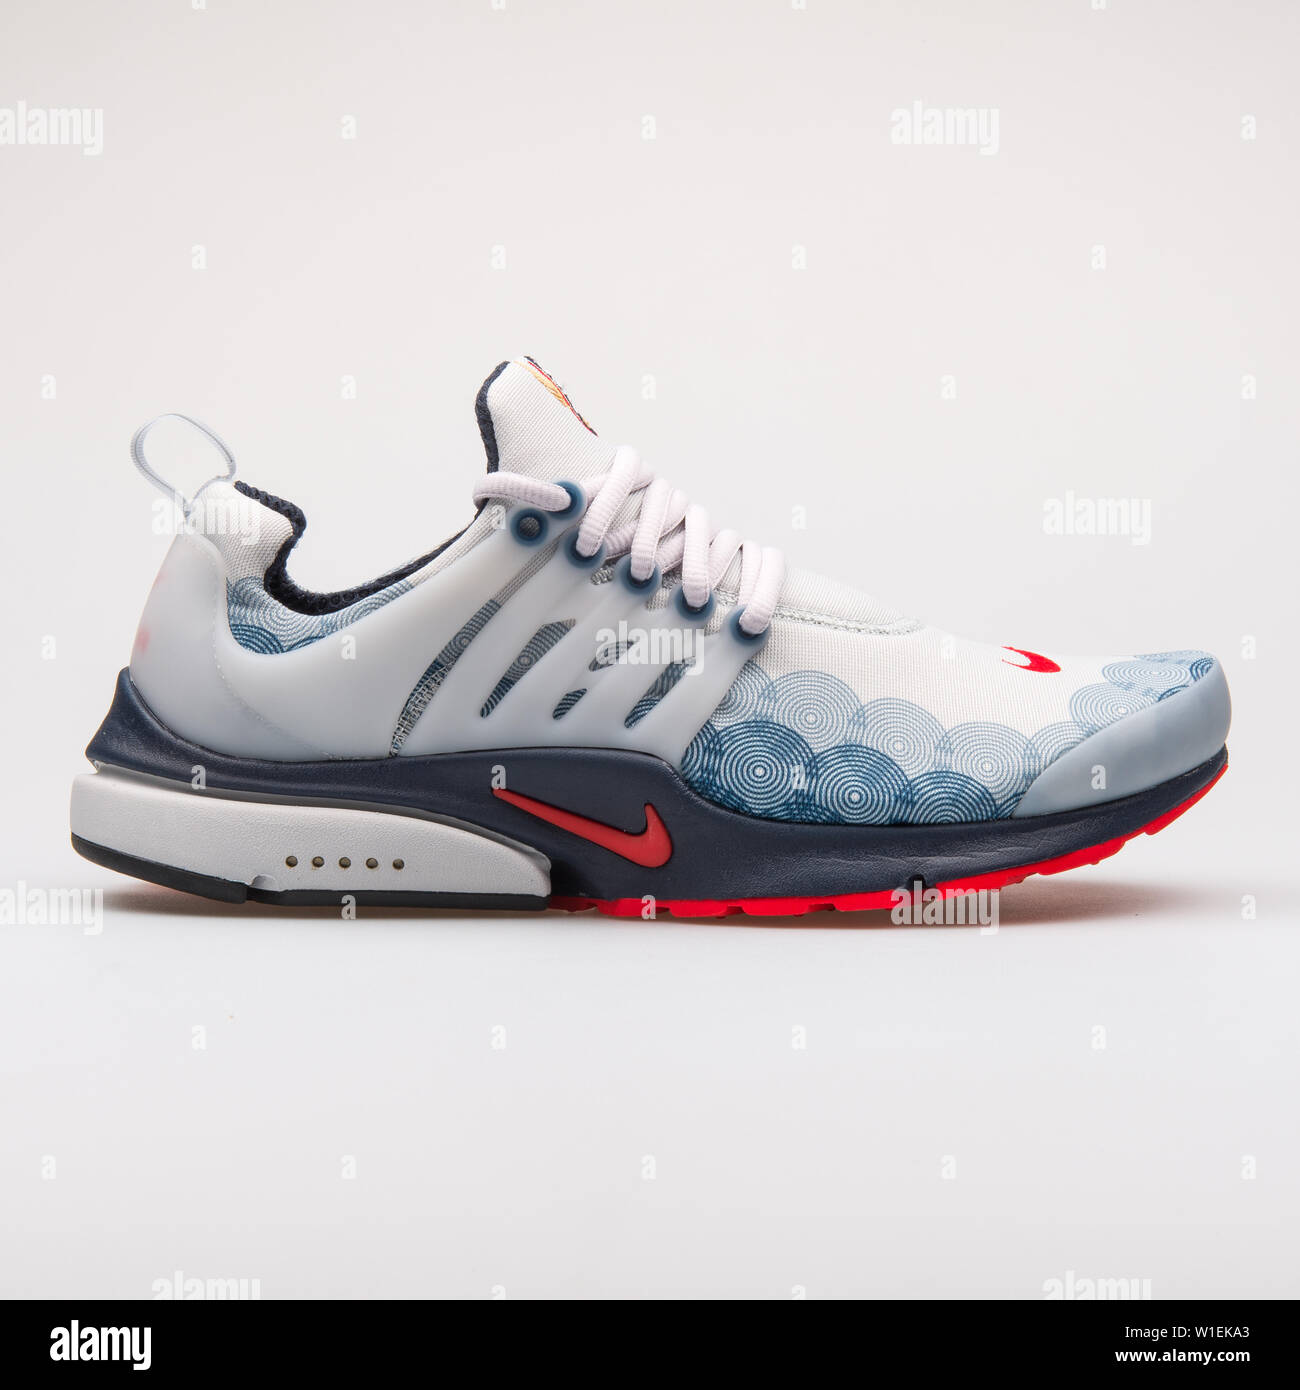 VIENNA, AUSTRIA - AUGUST 28, 2017: Nike Air Presto GPX grey, blue and red  sneaker on white background Stock Photo - Alamy